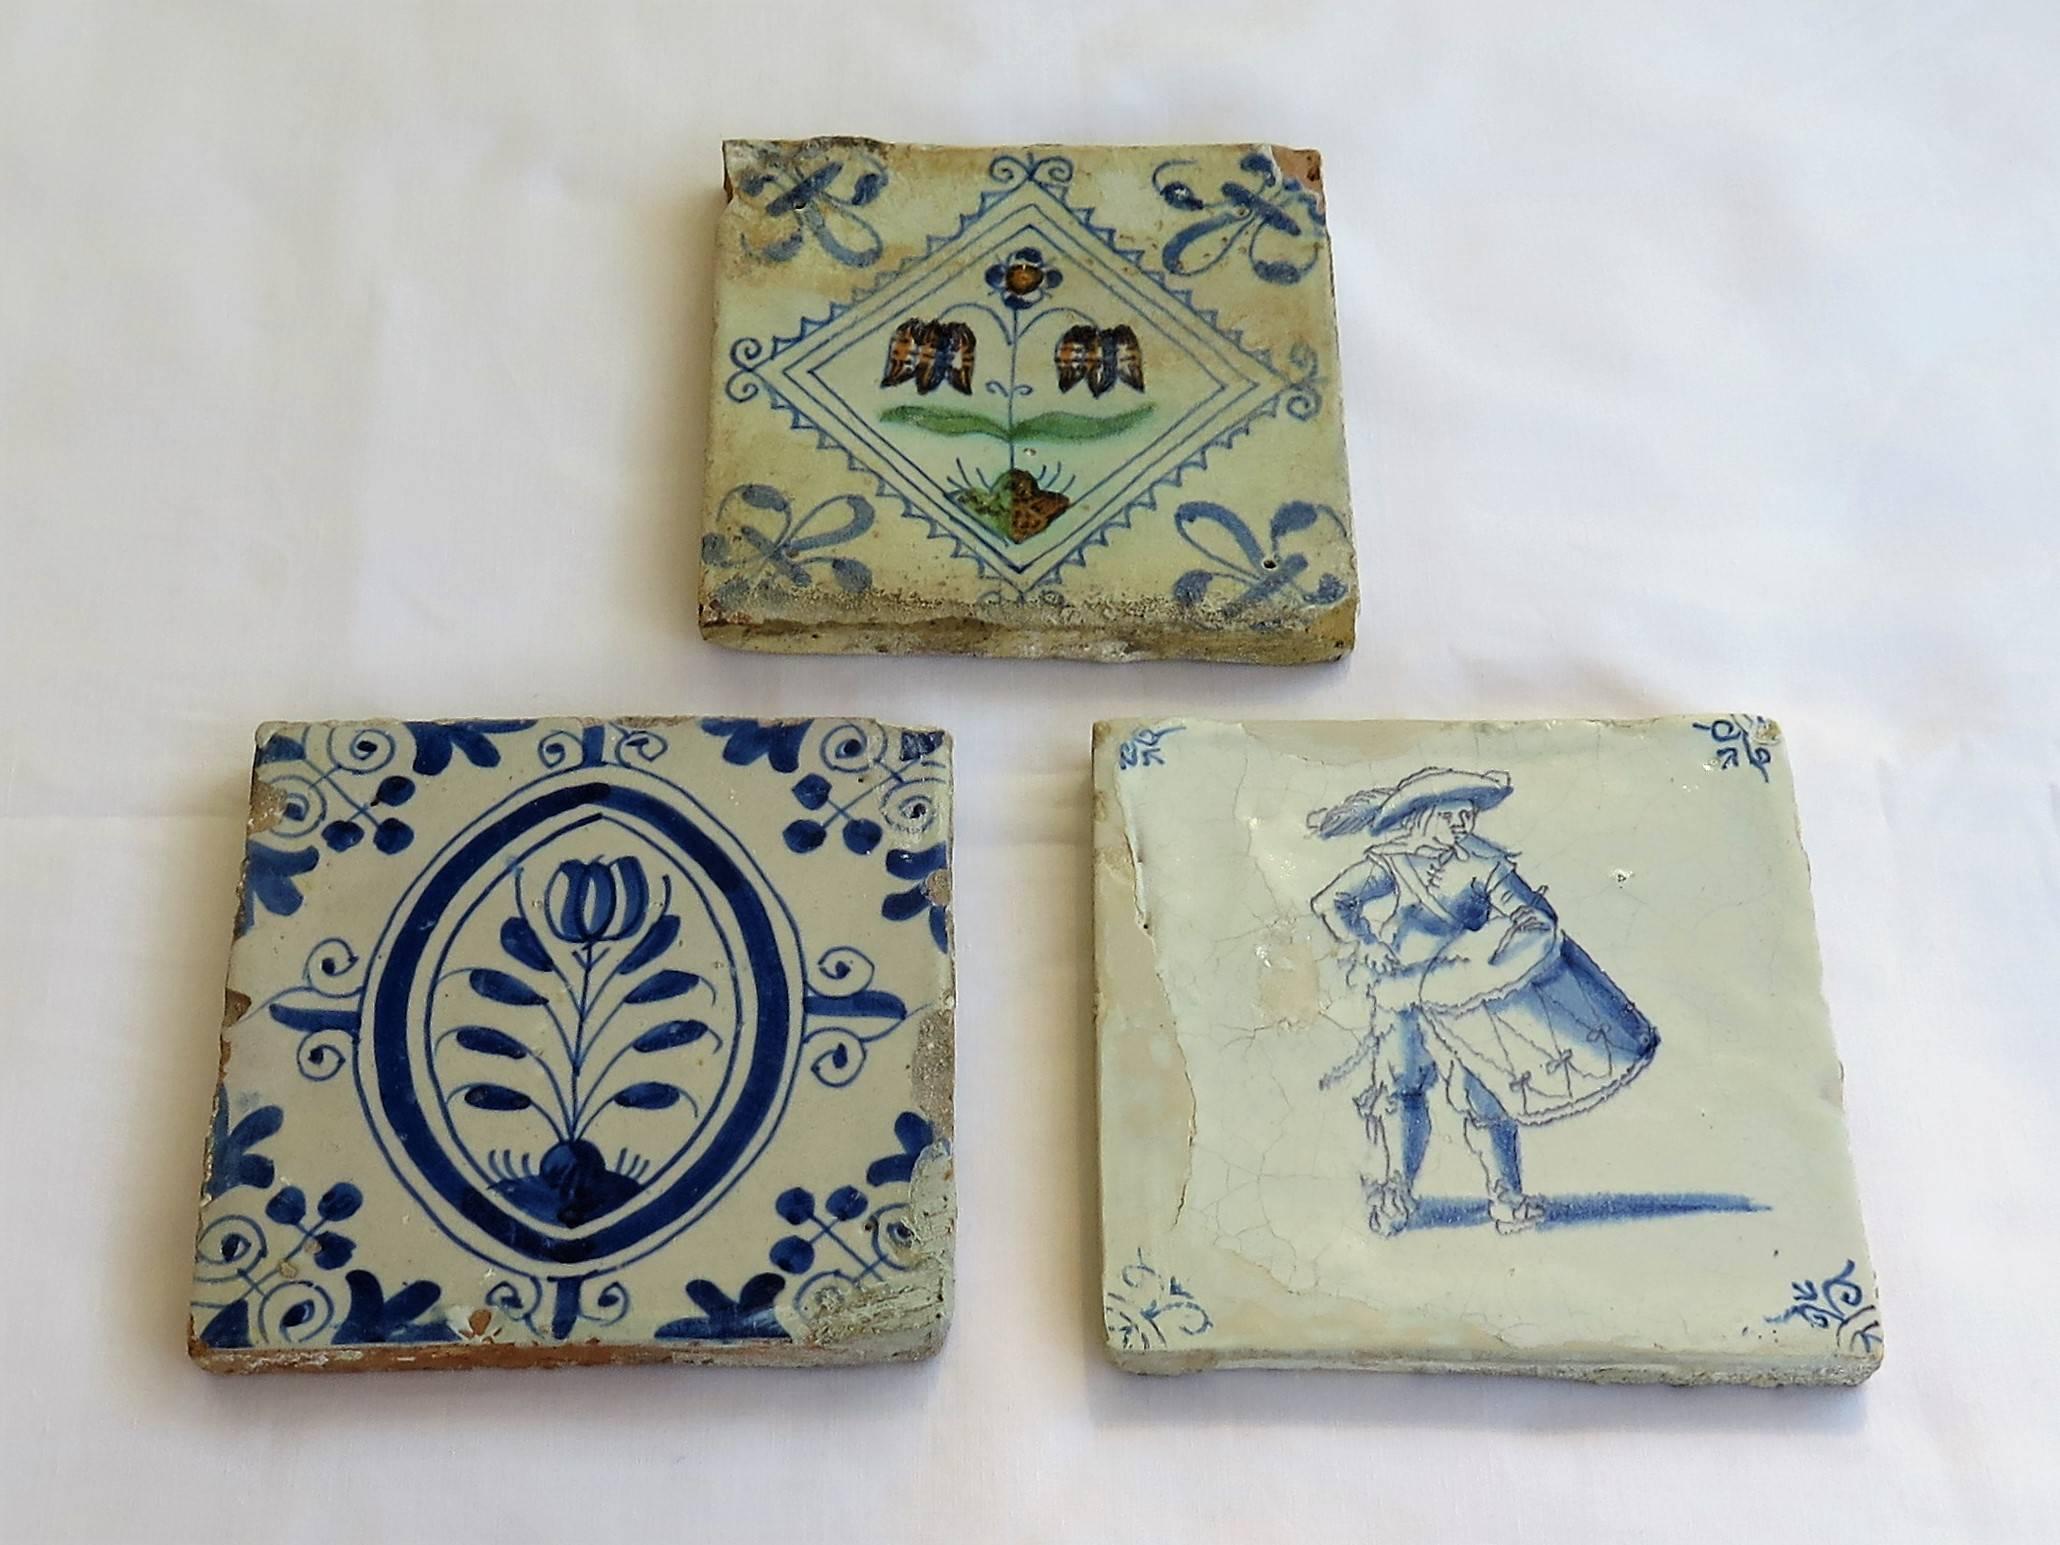 These are THREE very attractive and interesting, Dutch (Netherlands), Delft Ceramic Wall Tiles dating to the 17th Century.

All tiles are nominally 5 inches square and 7/16 inches thick. 

Tile 1 - Top  - Polychrome
This is probably the oldest tile,